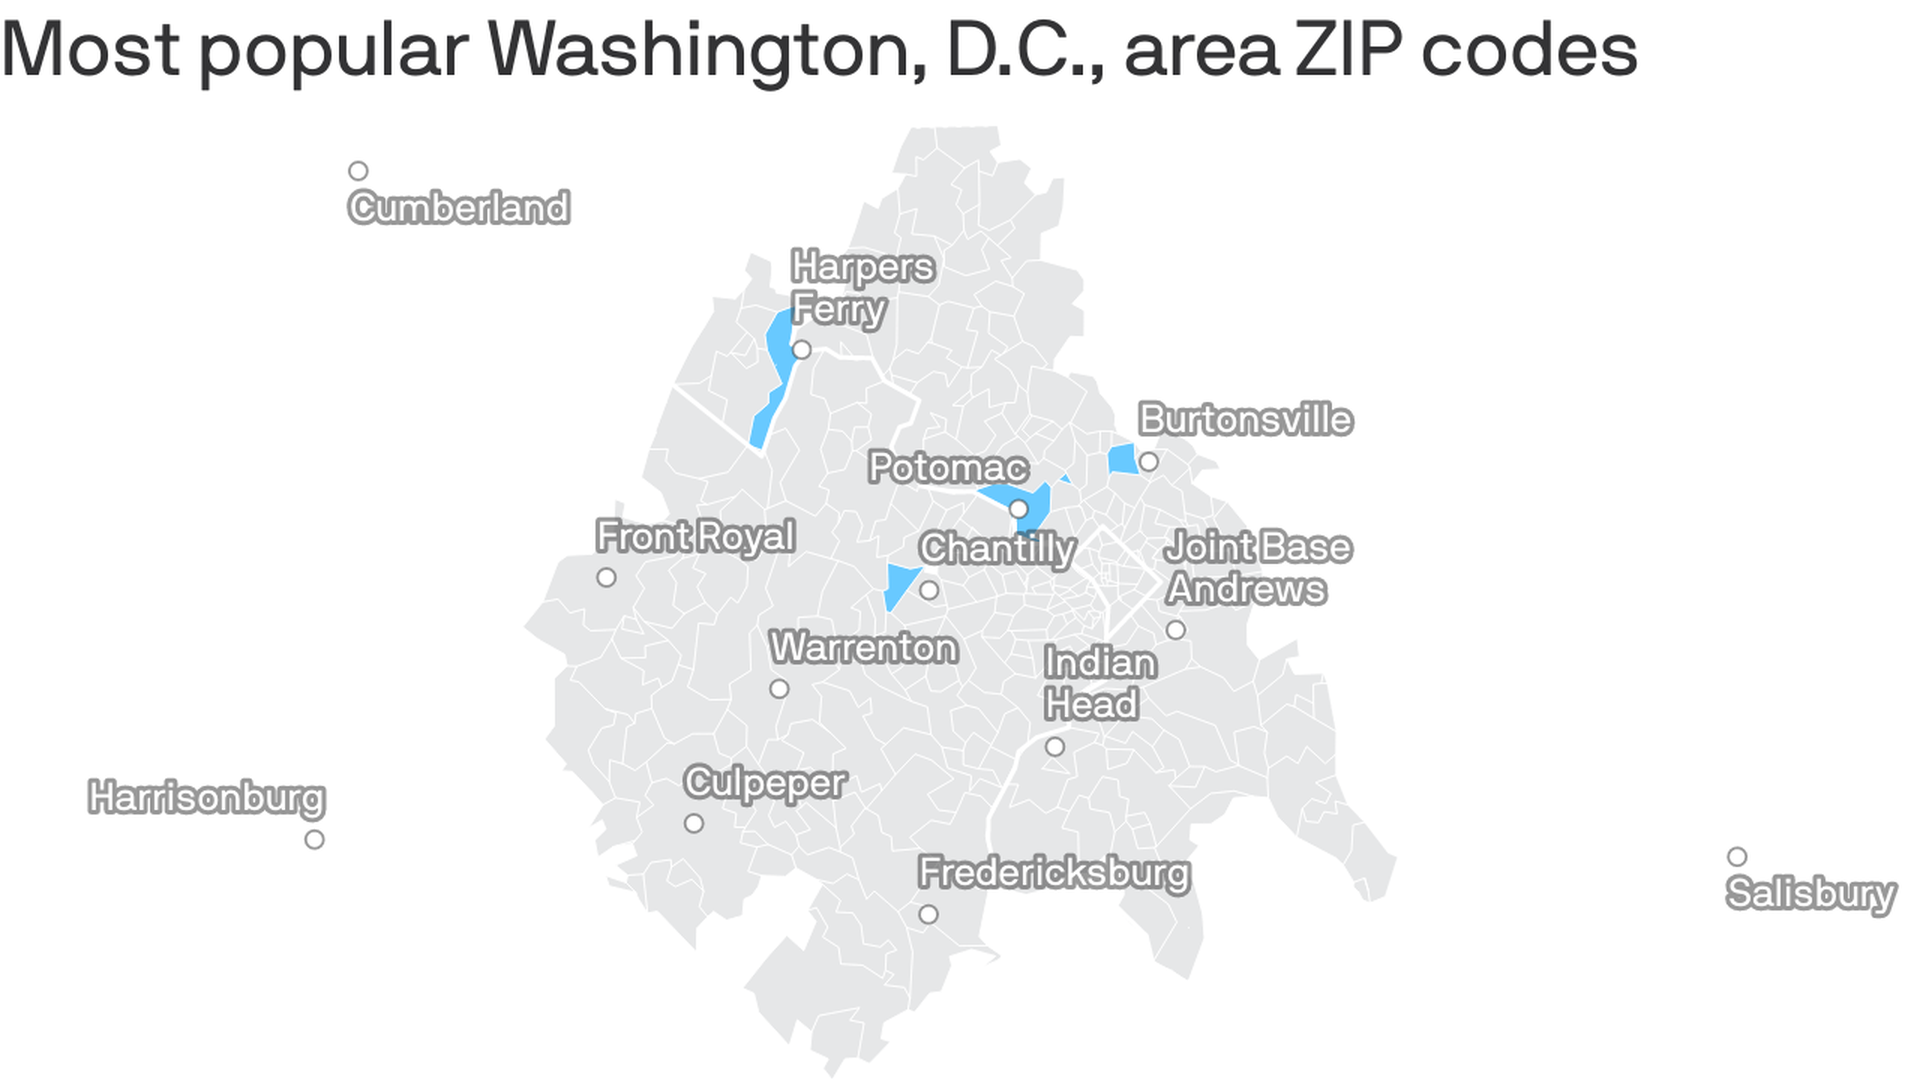 A map of the D.C. metro highlighting the five top zip codes in blue.